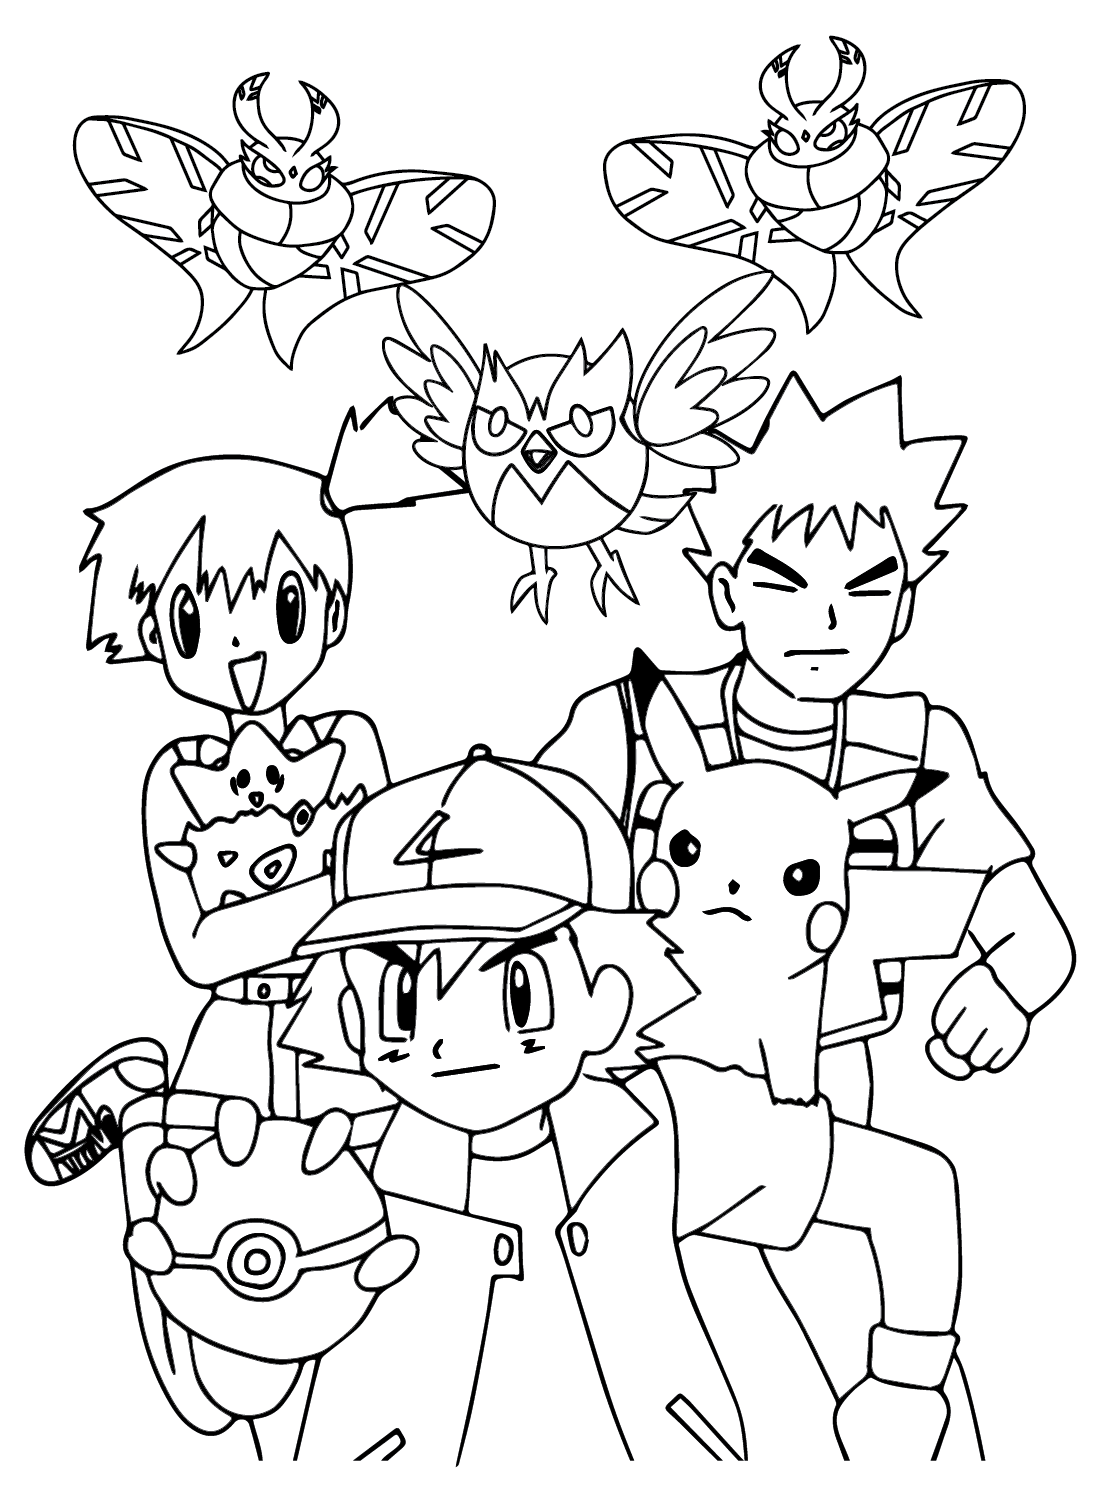 Ash Ketchum and Pokemon Coloring Page from Brock